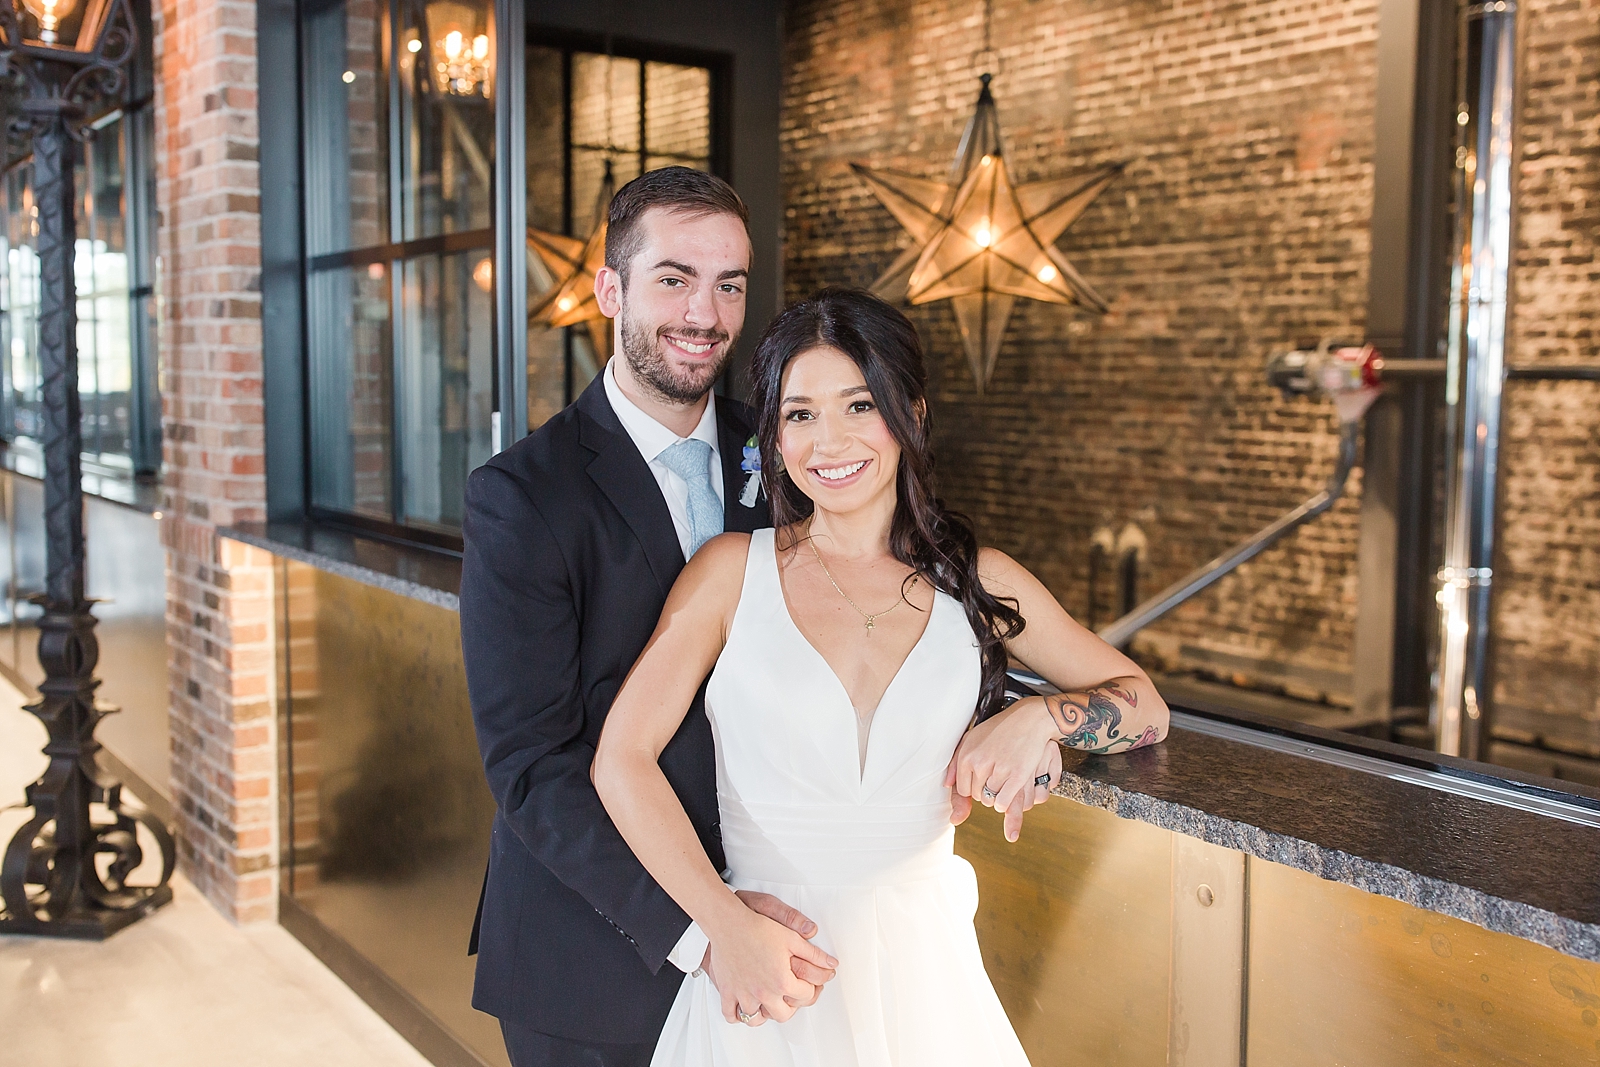 Glover Park Brewery Wedding Bride and Groom holding hands in venue in front of star lights Photo